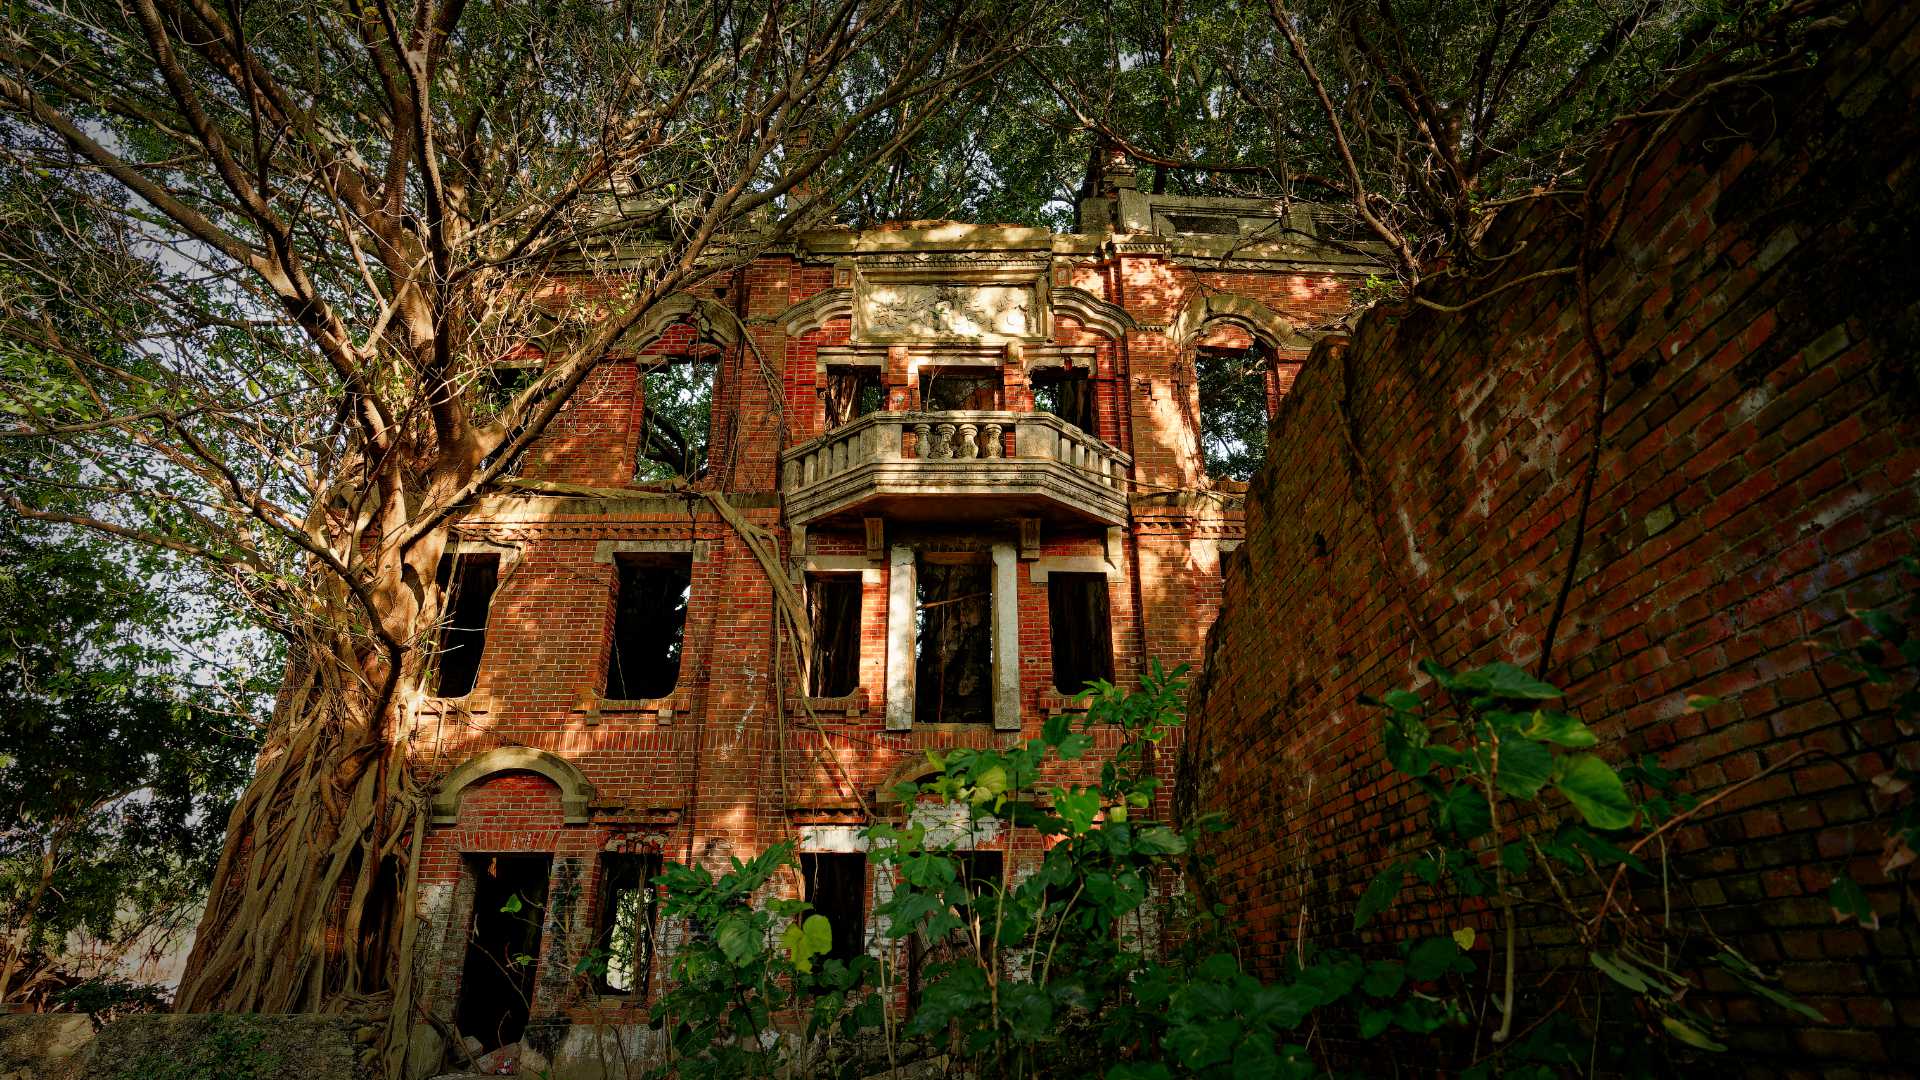 The front of Minxiong Haunted House, an abandoned three-story brick mansion a Chiayi forest in Taiwan. The windows and doors are missing. There are tall trees growing out from the masonry, all across the building.